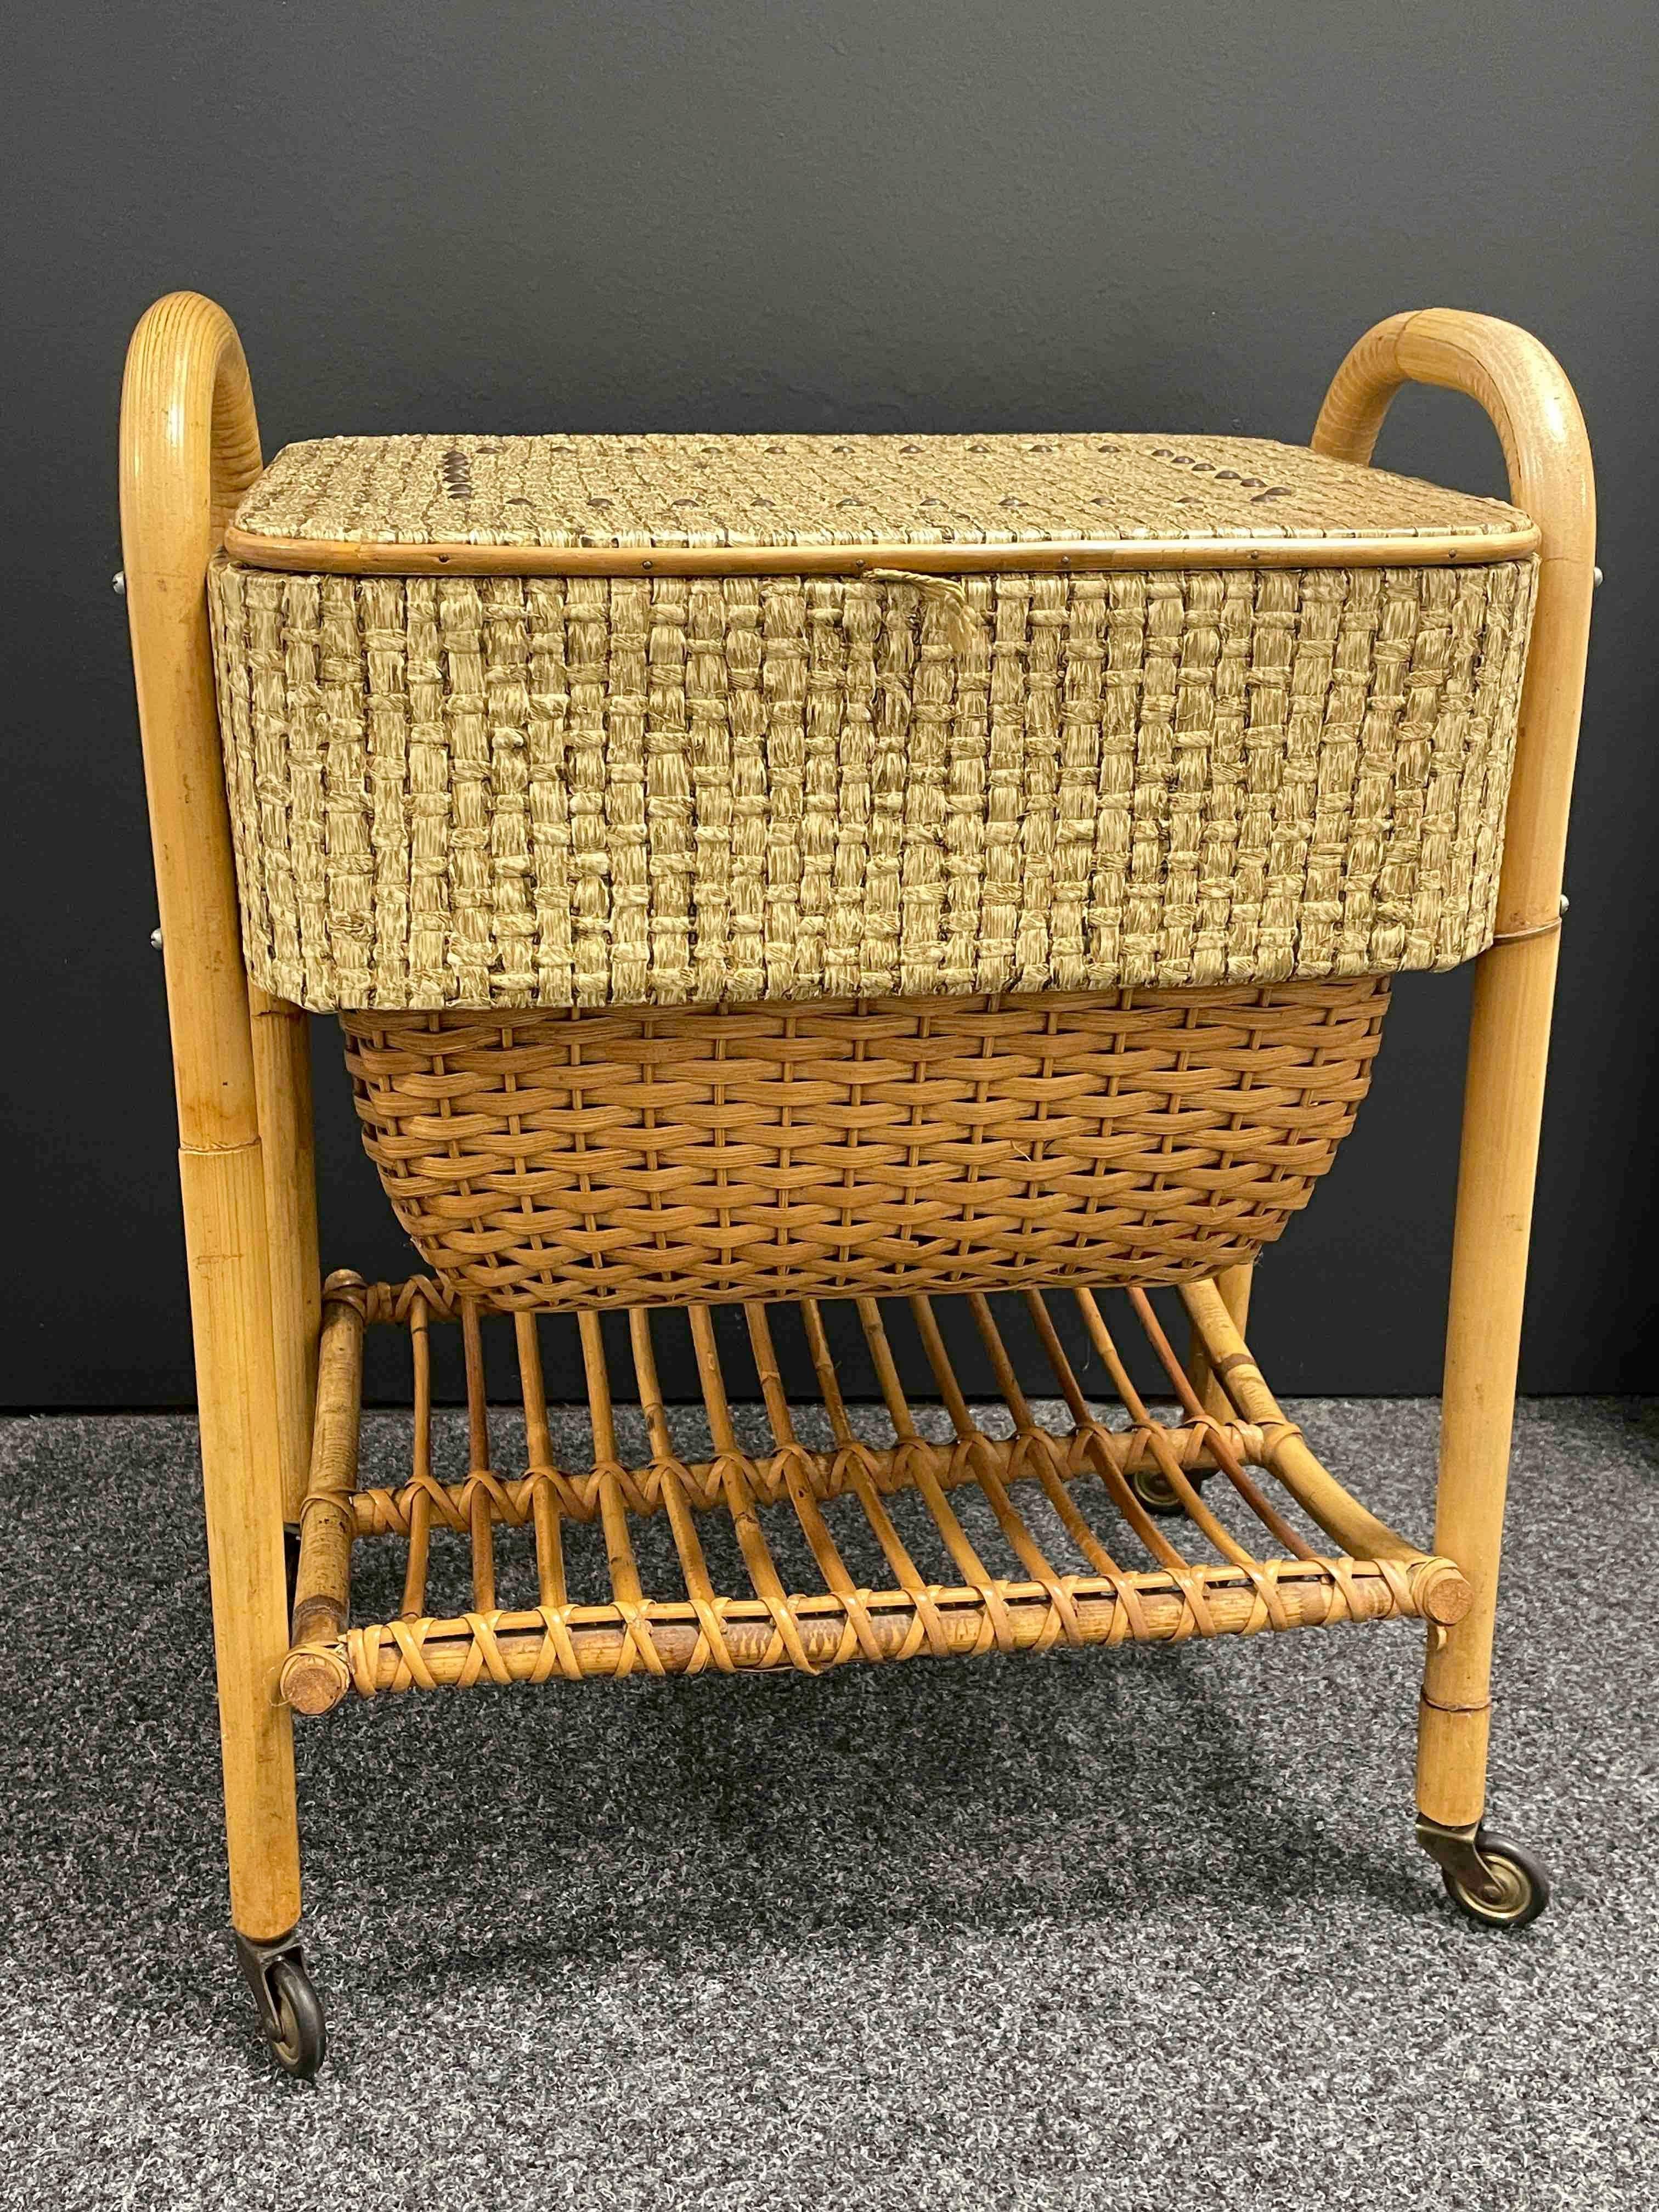 Beautiful rattan bamboo sewing box on wheels. This time capsule piece is in outstanding original condition. Don't smells - that’s a miracle! Made of Rattan, box made of wood and bamboo or rattan covered with plastic. The sewing box itself is approx.